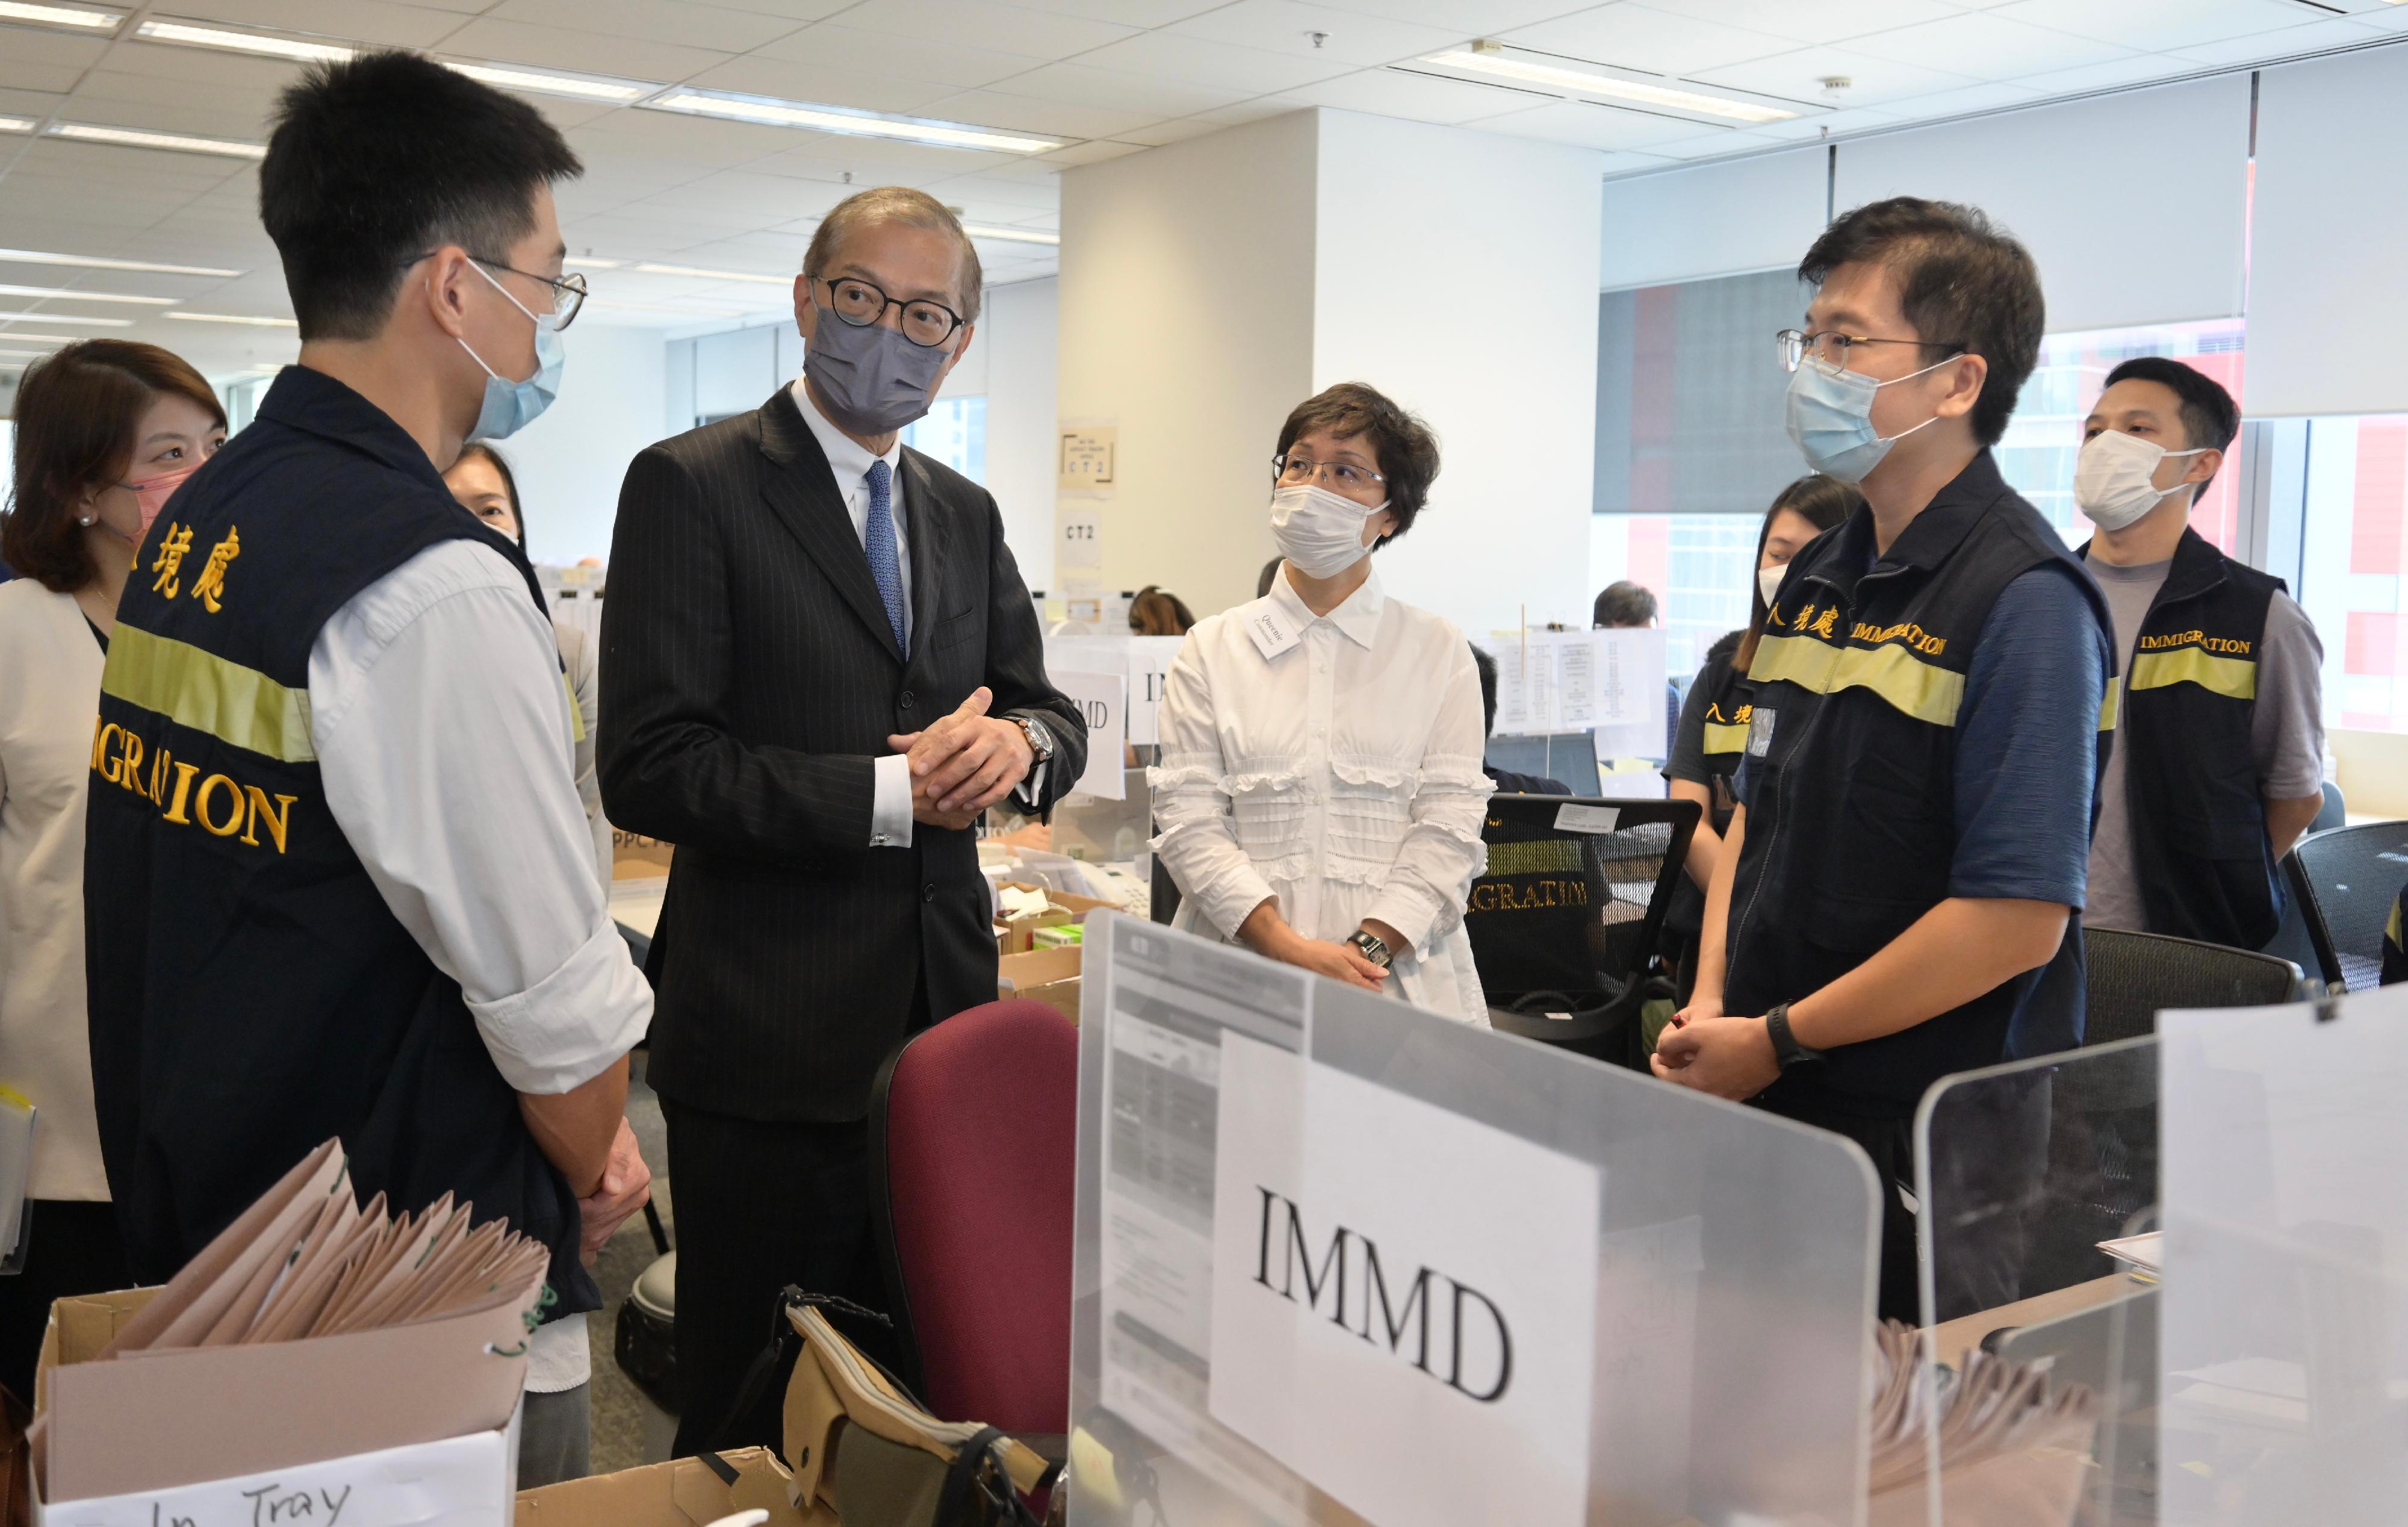 The Secretary for Health, Professor Lo Chung-mau (second left), visits the Contact Tracing Office of the Centre for Health Protection of the Department of Health today (August 3) and receives a briefing by frontline staff on the work on contact tracing of close contacts of COVID-19 patients.